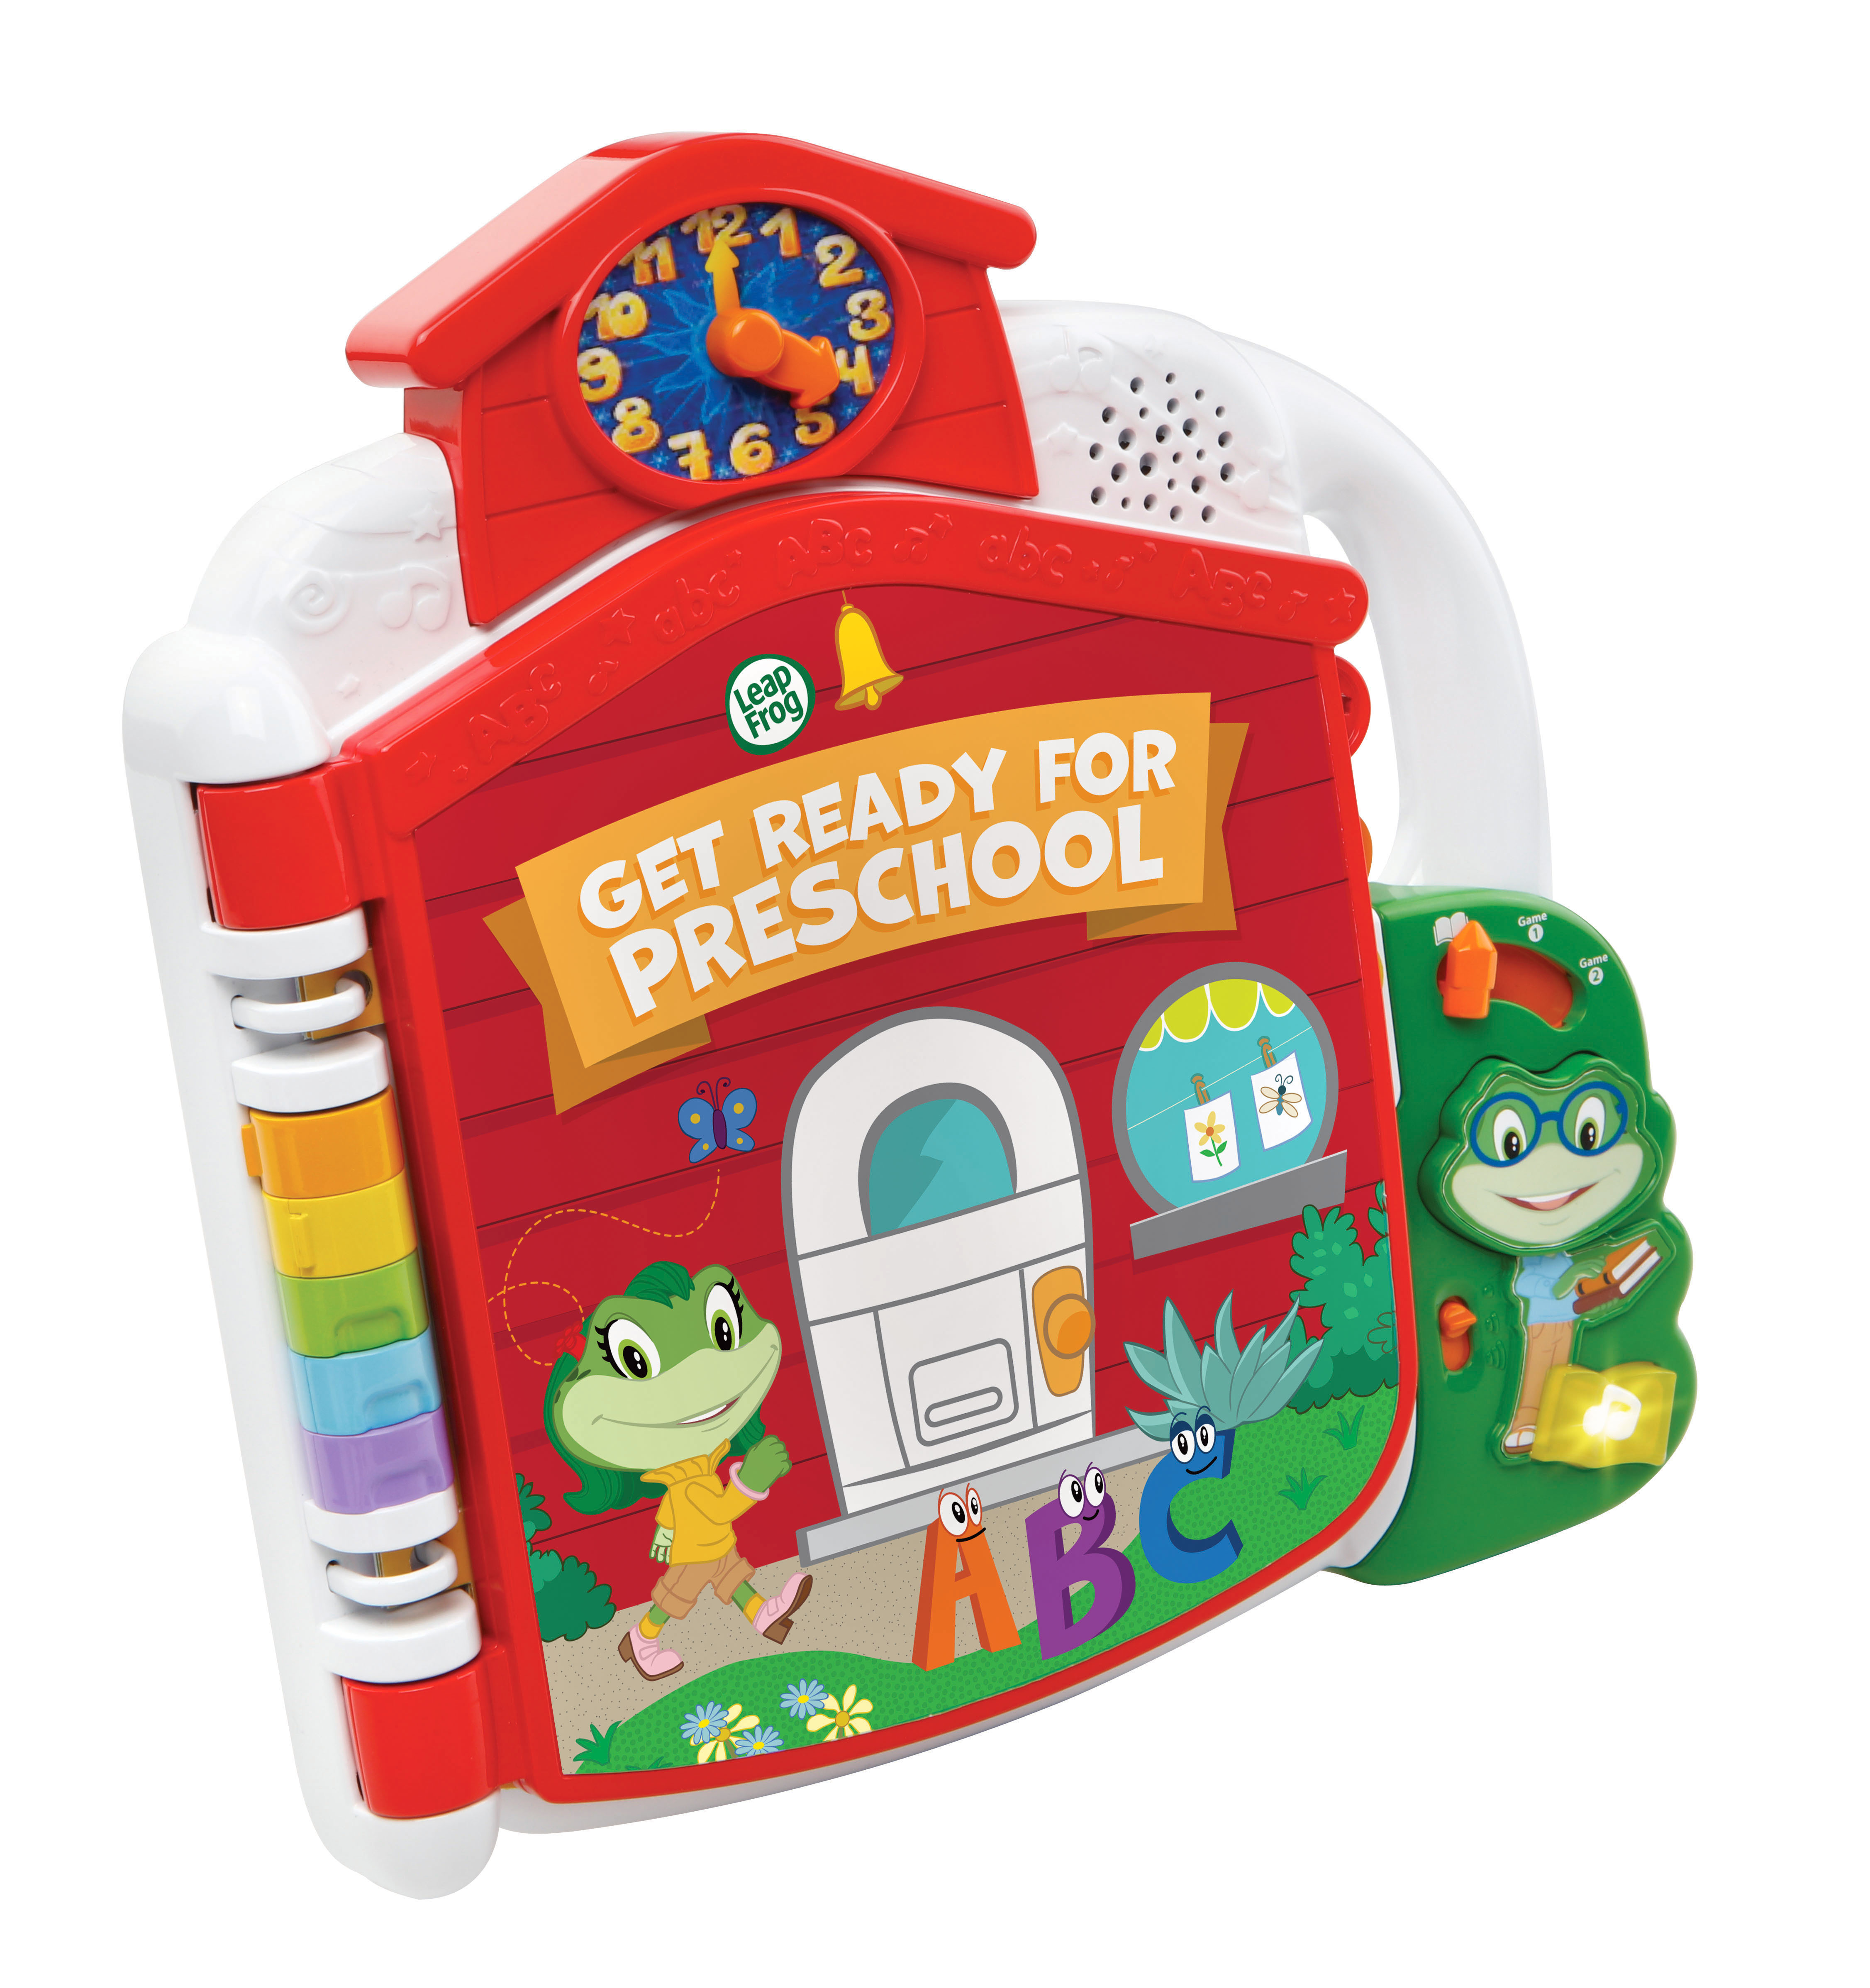 Tad’s Get Ready For School Book by LeapFrog